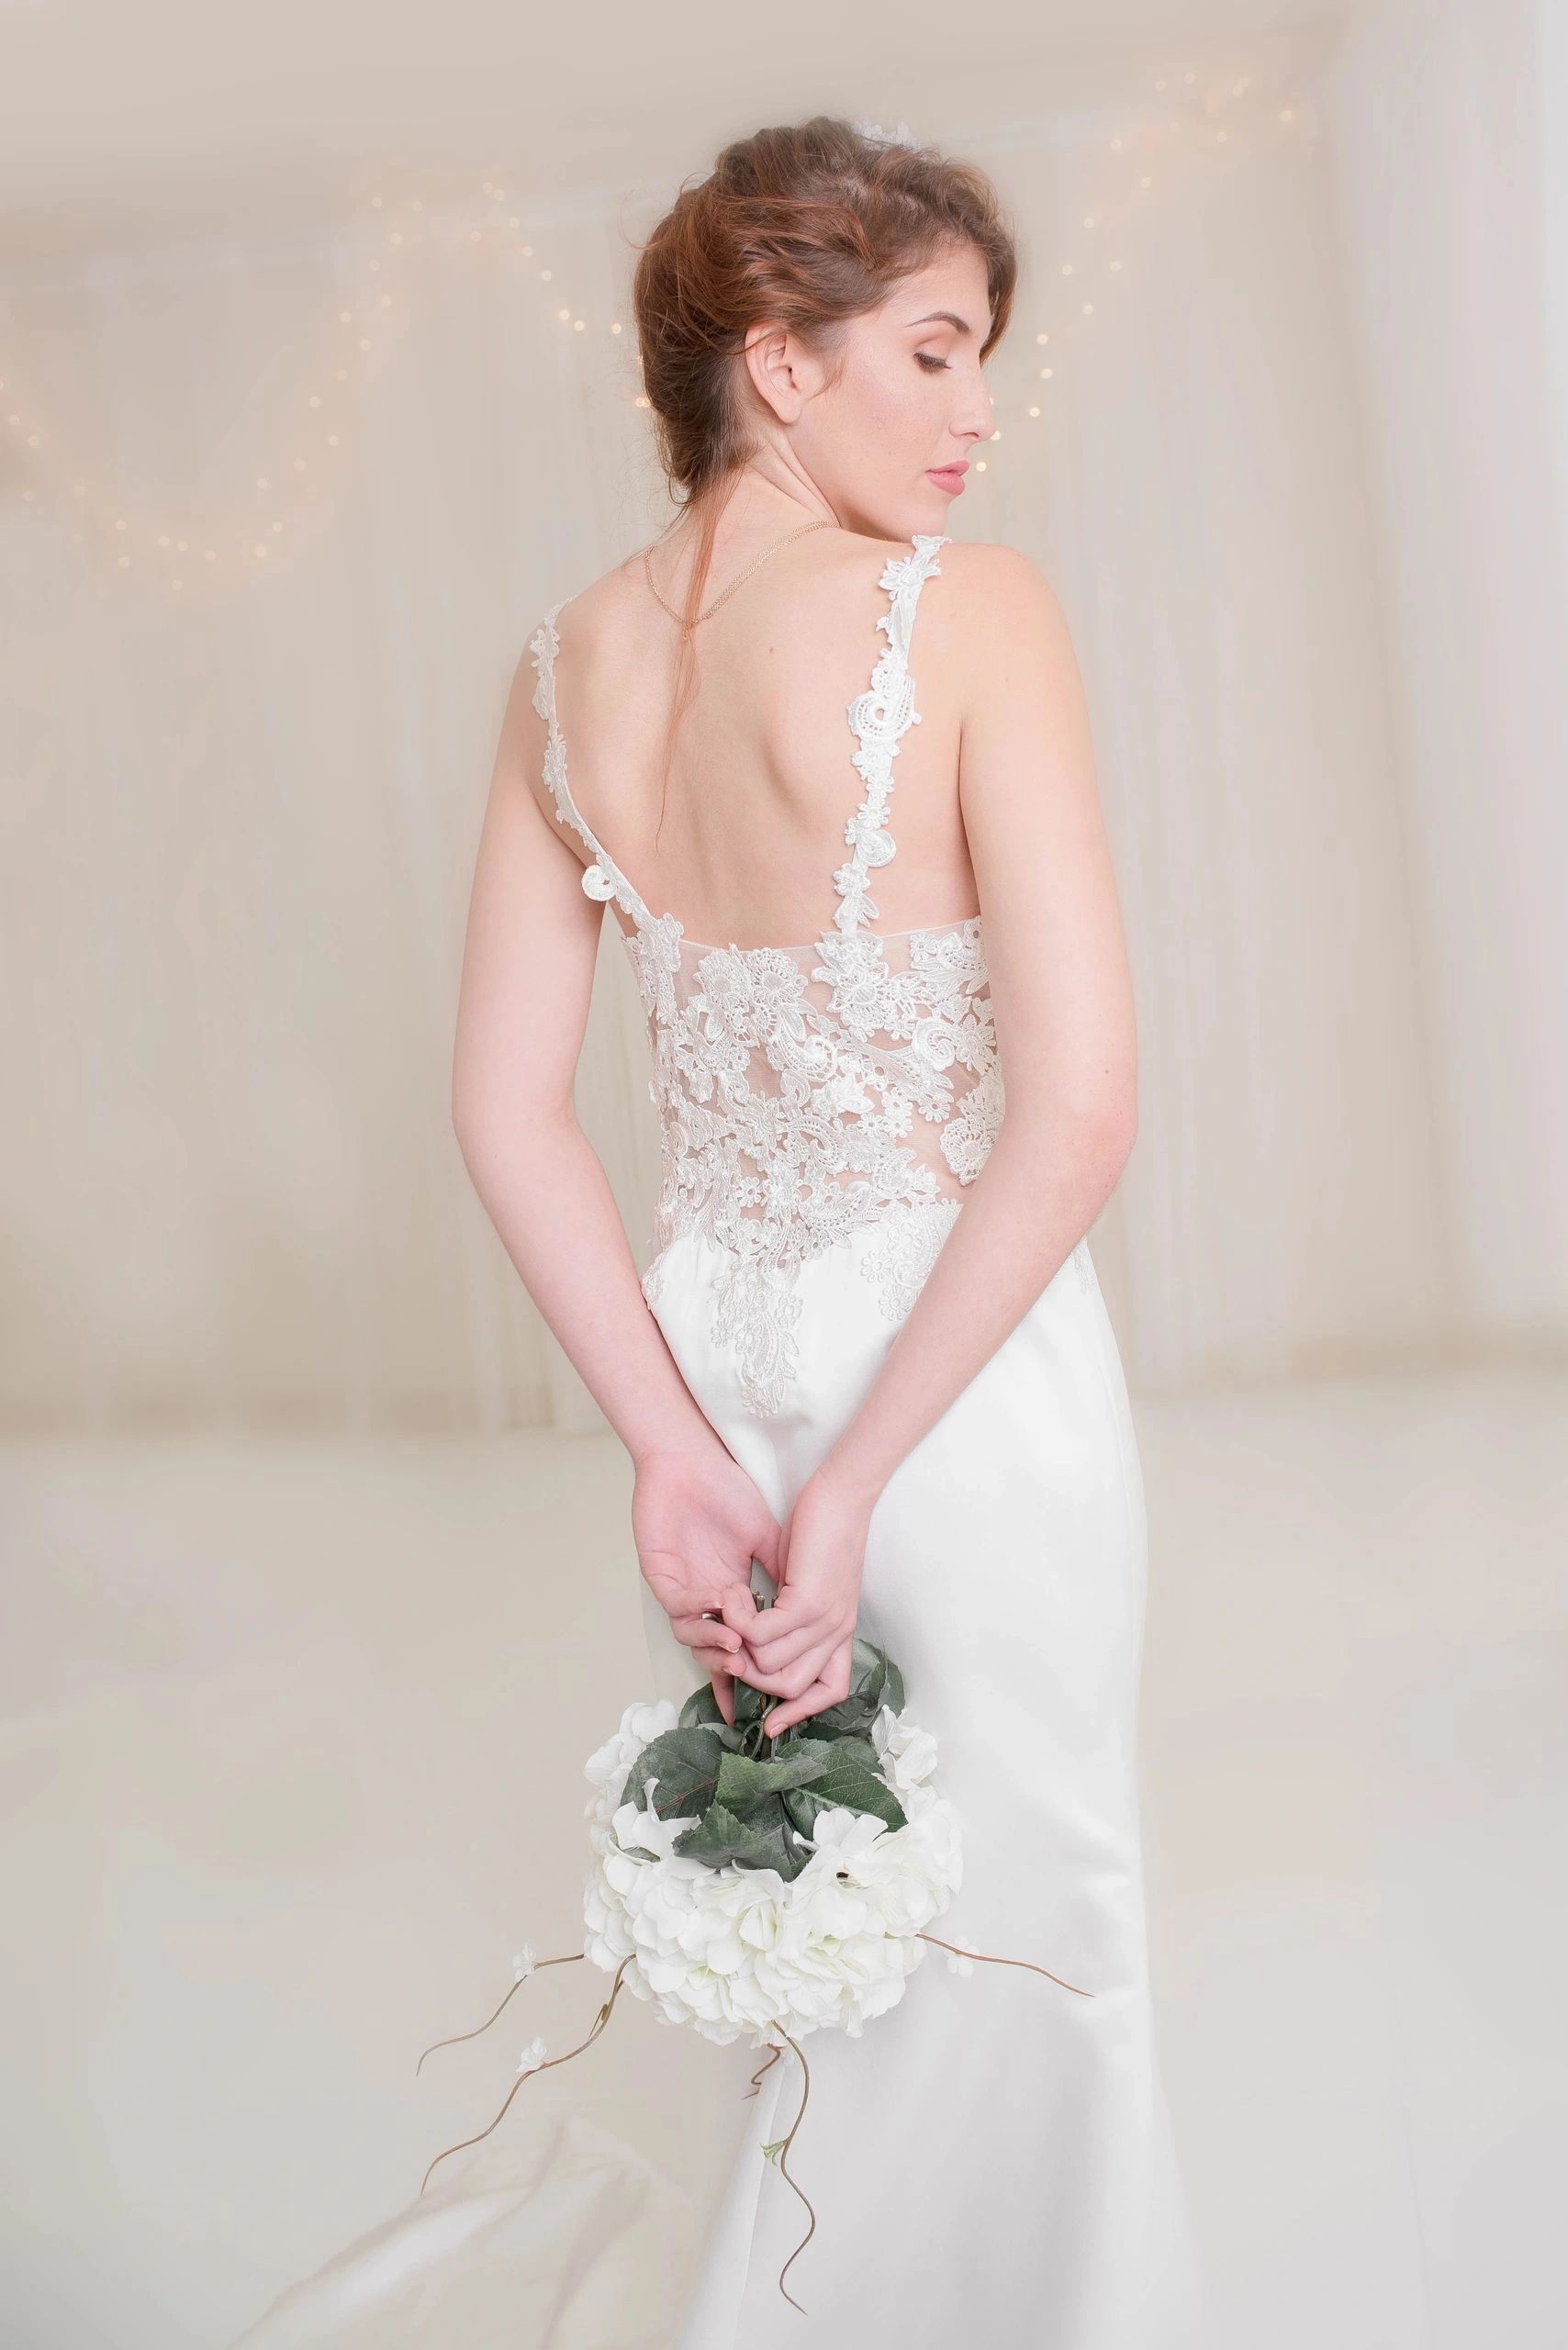 Bride in Wedding dress and boutique flowers